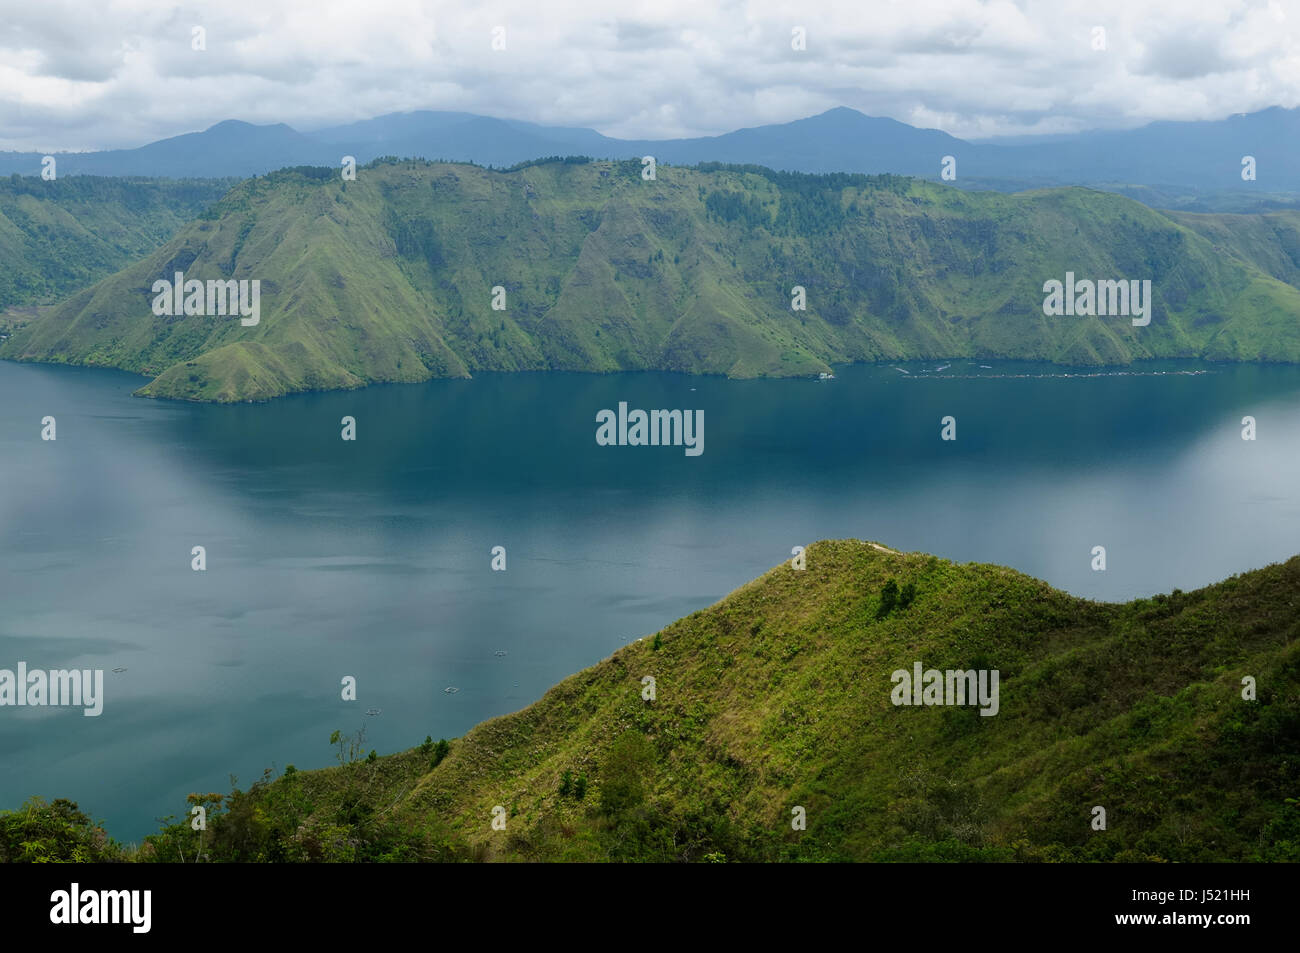 View from hills on an island Samosir to the Taba lake, Indonesia Stock Photo